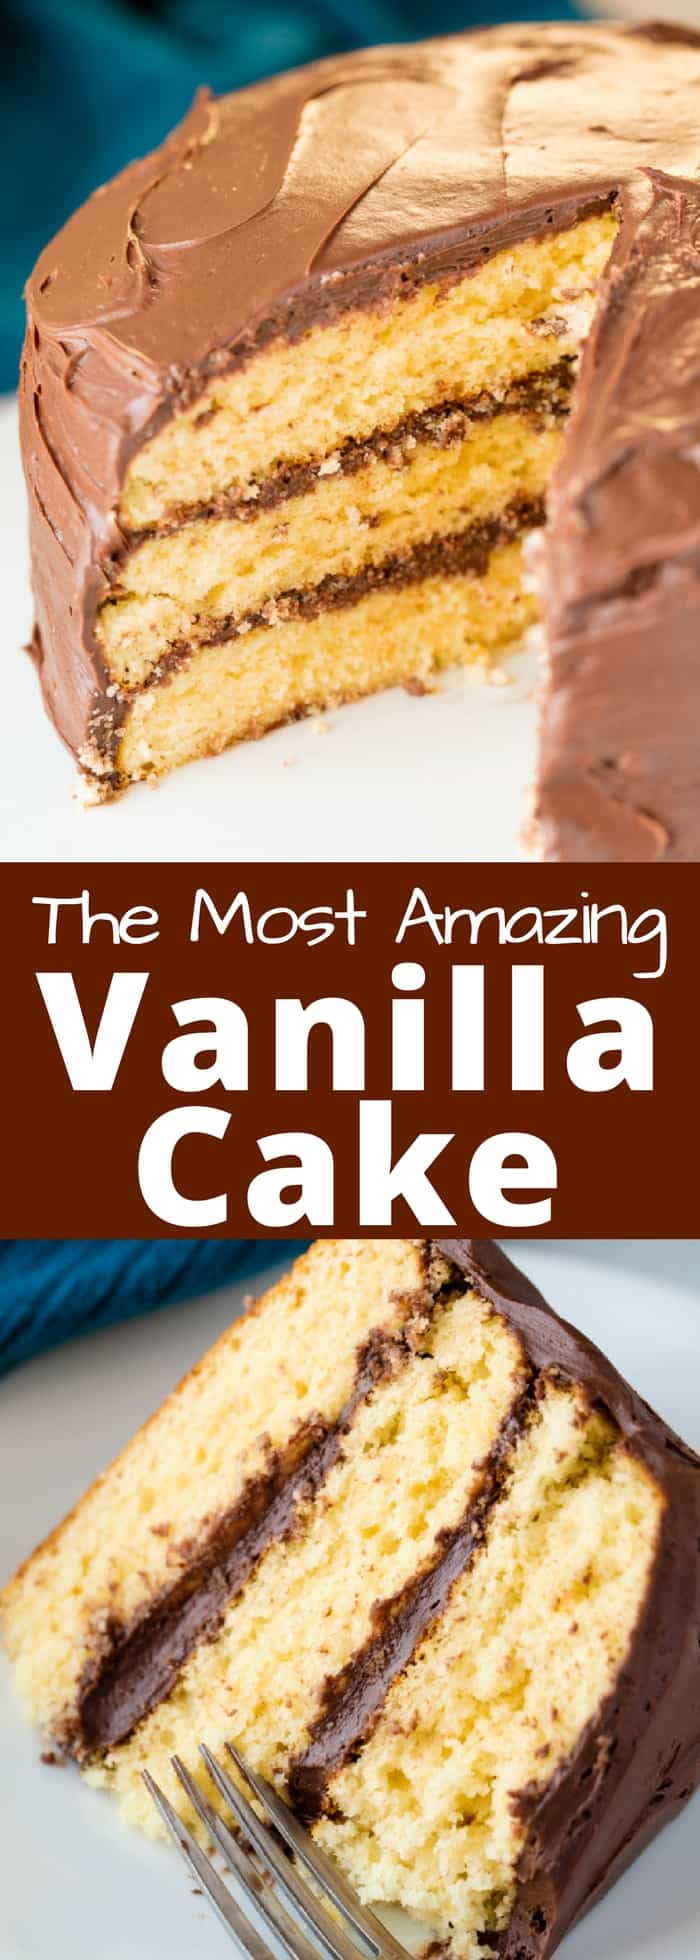 The Most Amazing Vanilla Cake is moist and flavorful and made completely from scratch The Most Amazing Vanilla Cake Recipe